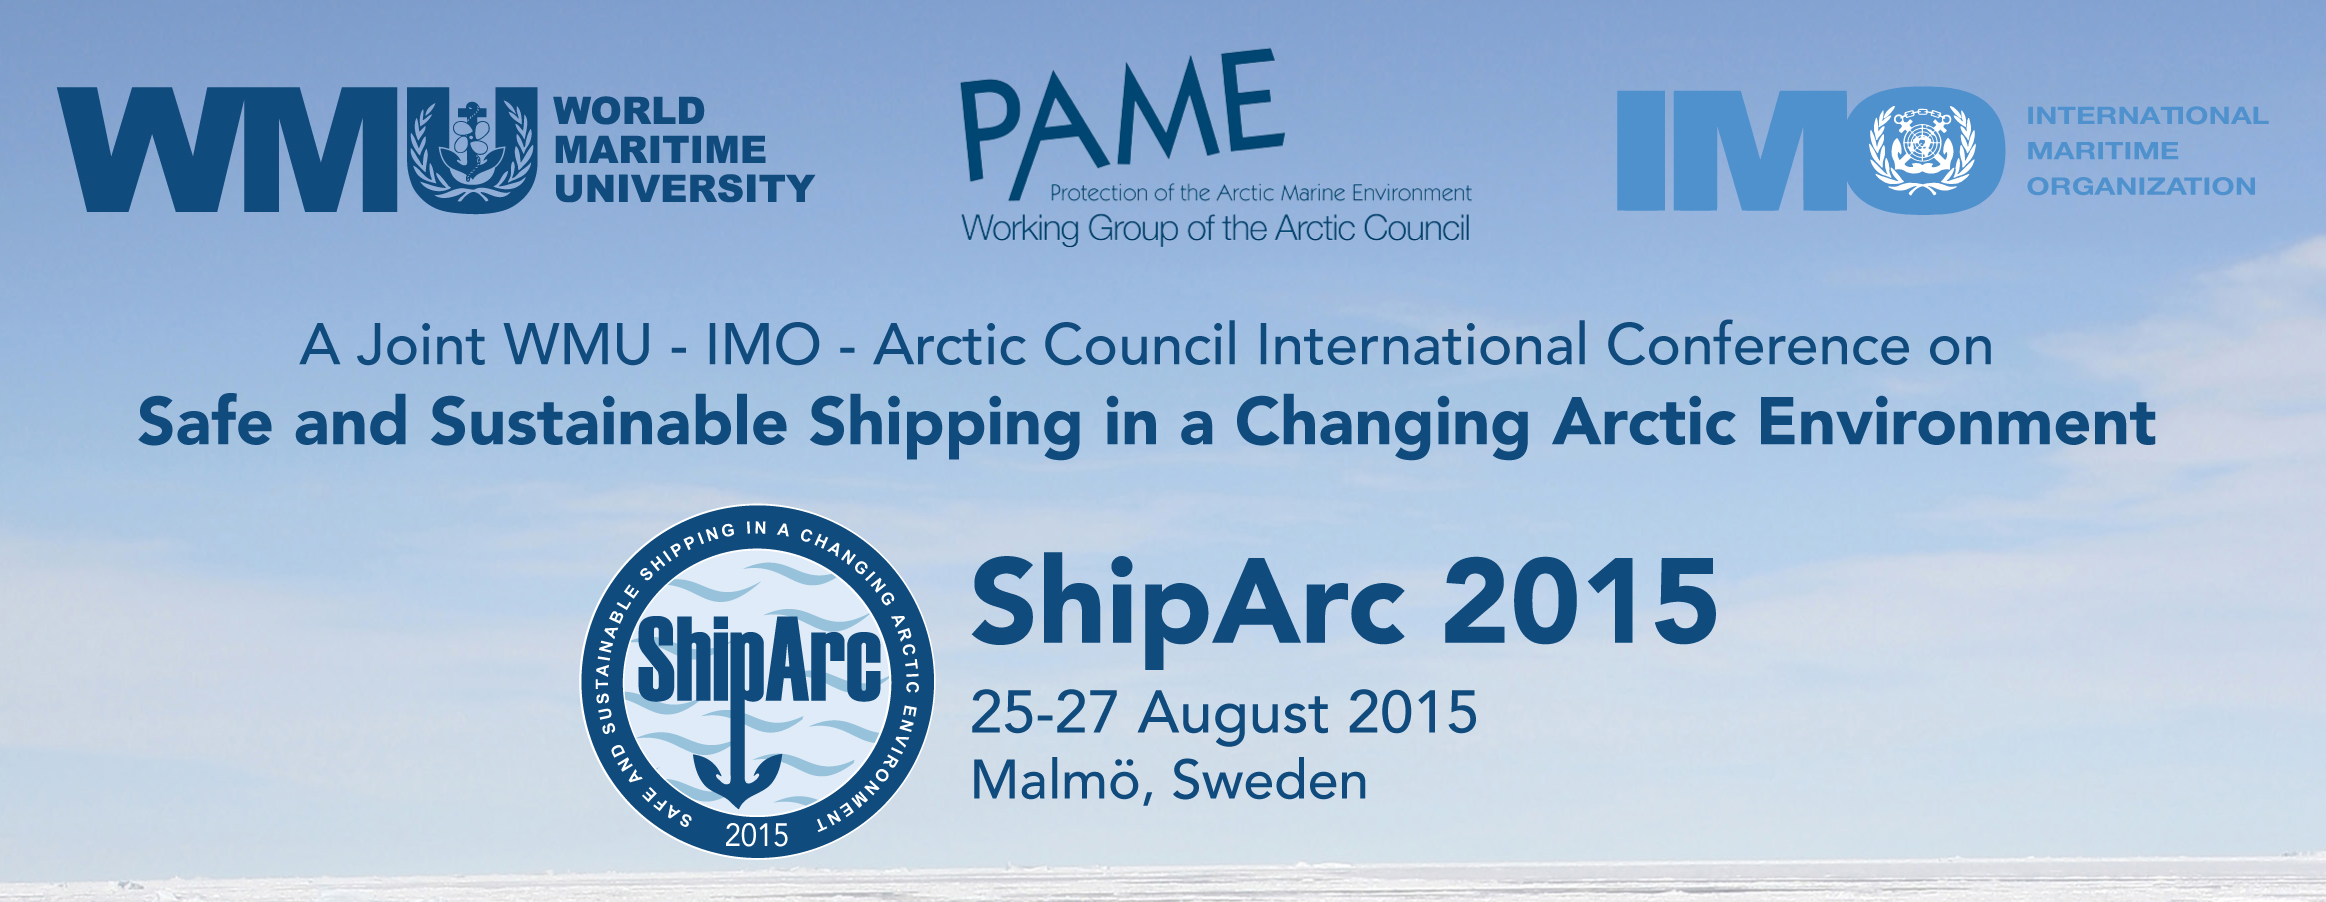 ShipArc 2015 Conference